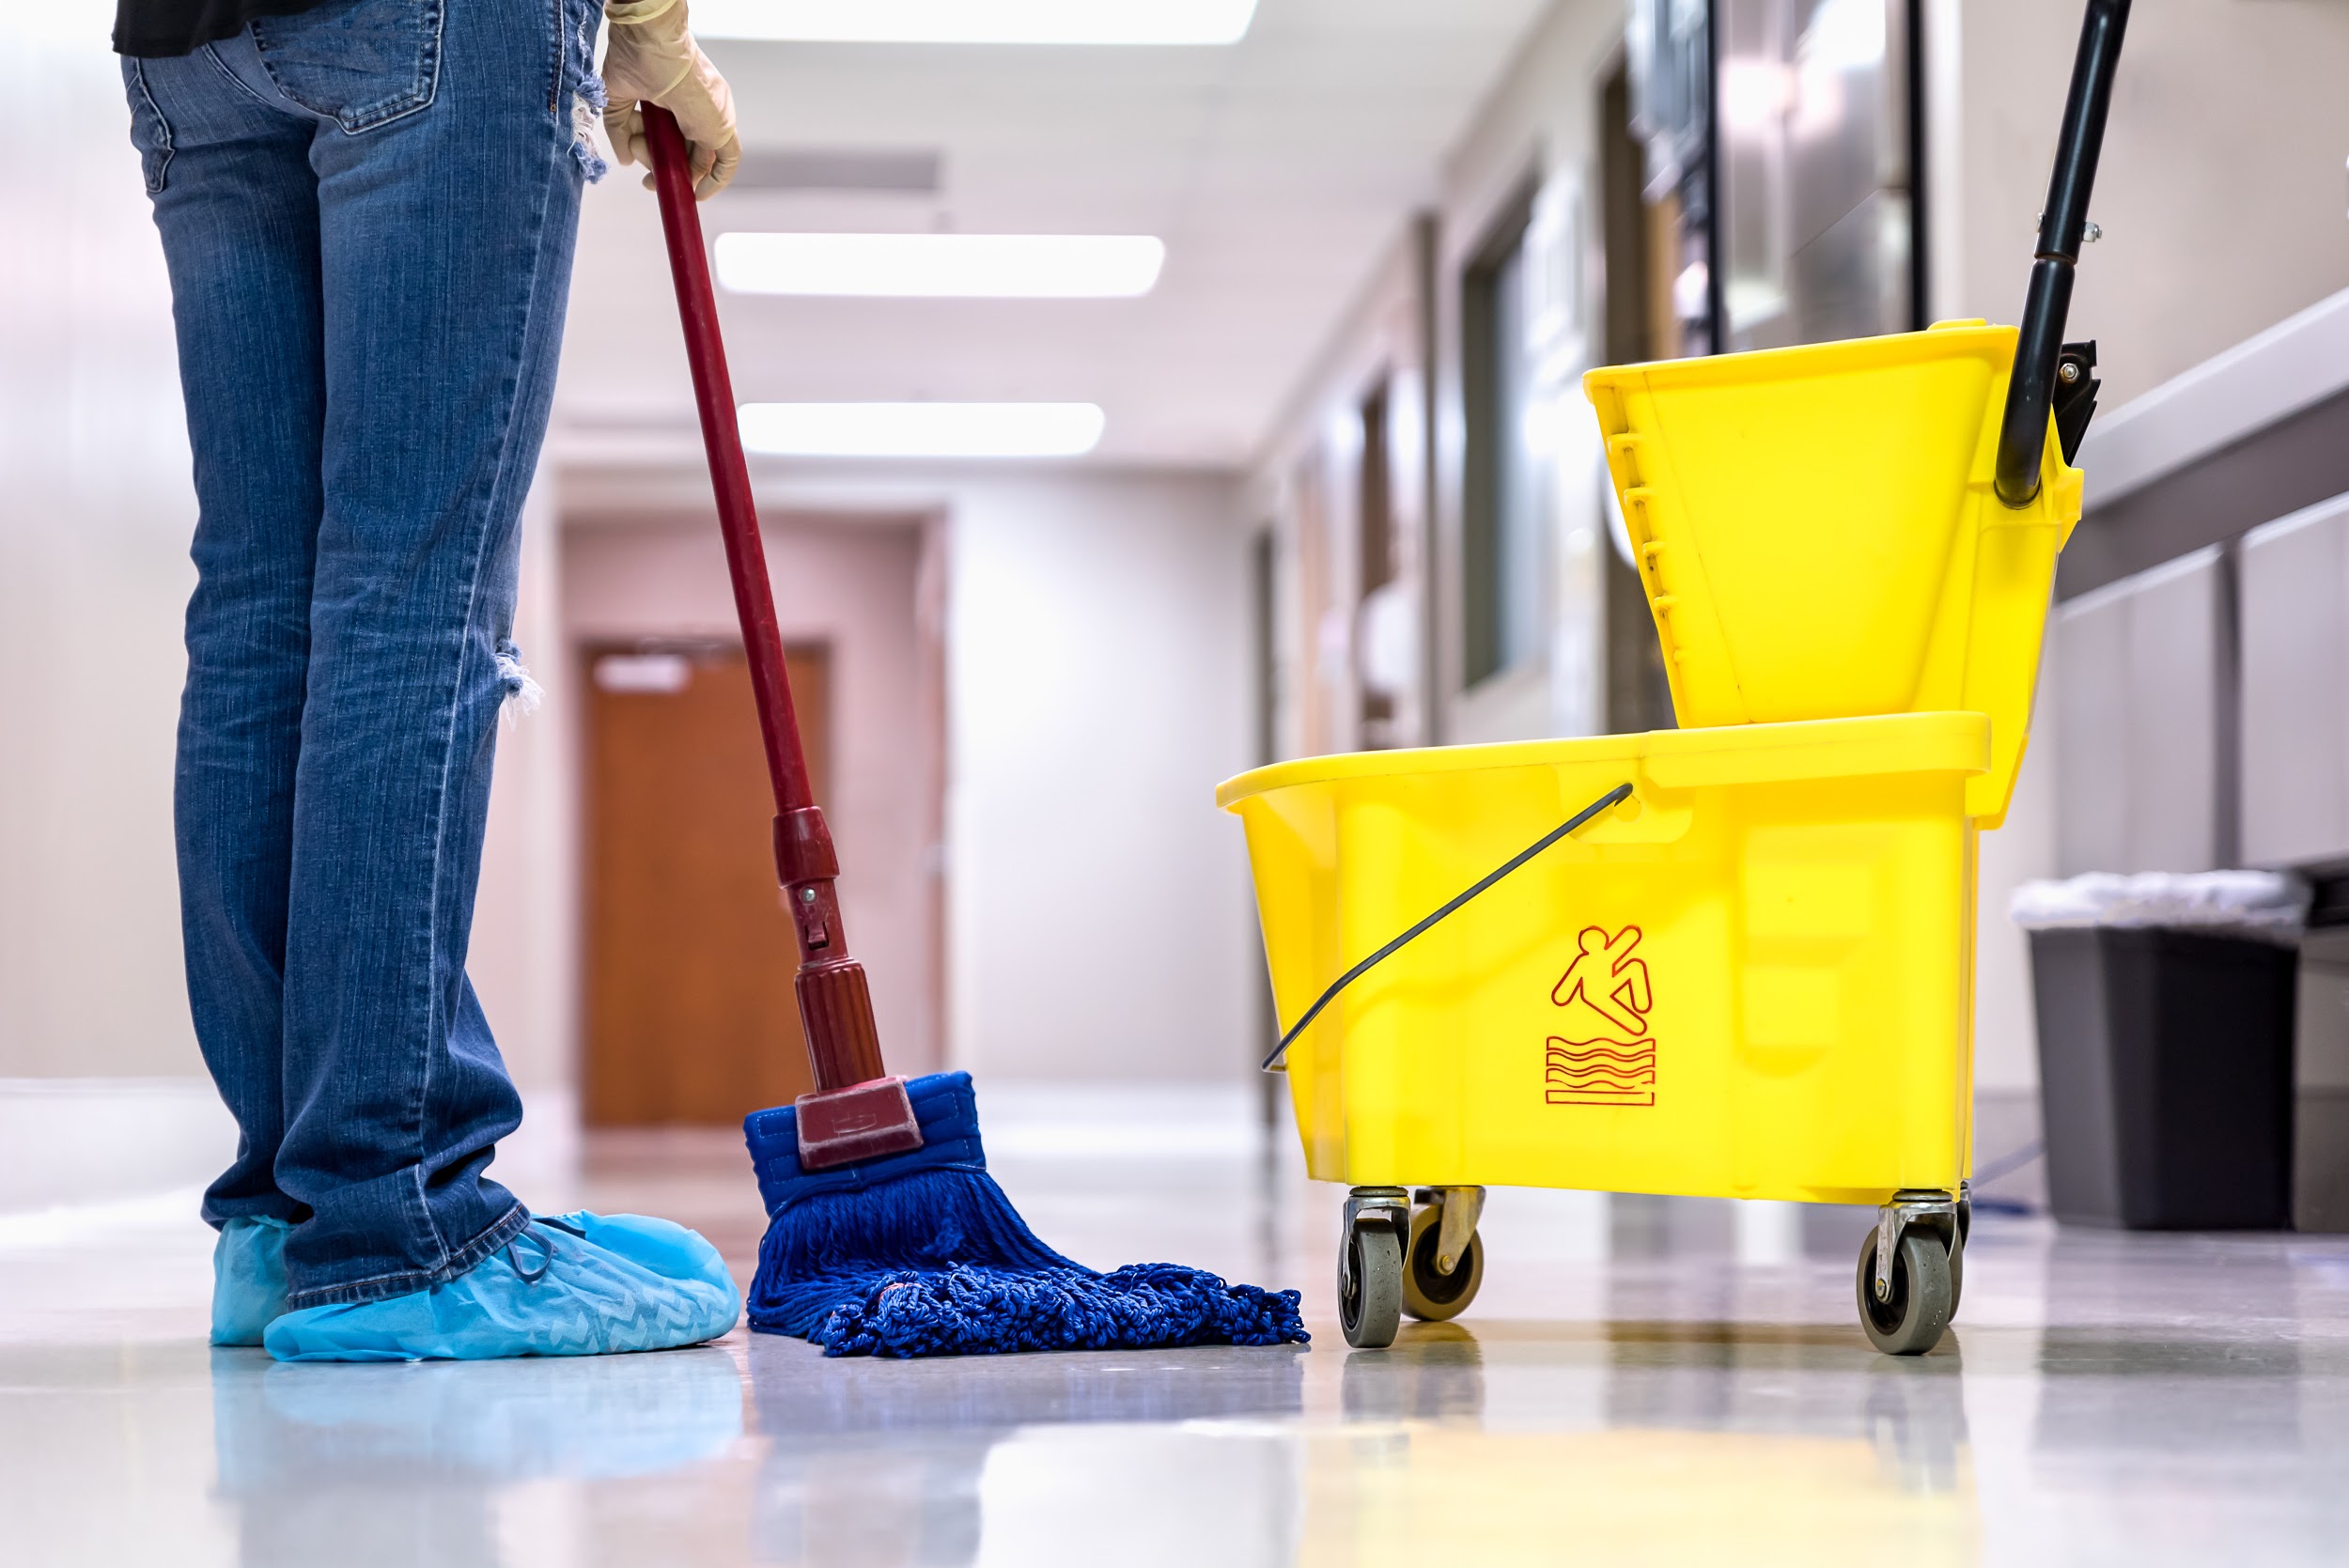 Dry Dust Mops vs. Wet Mops: Do You Need to Own Both?